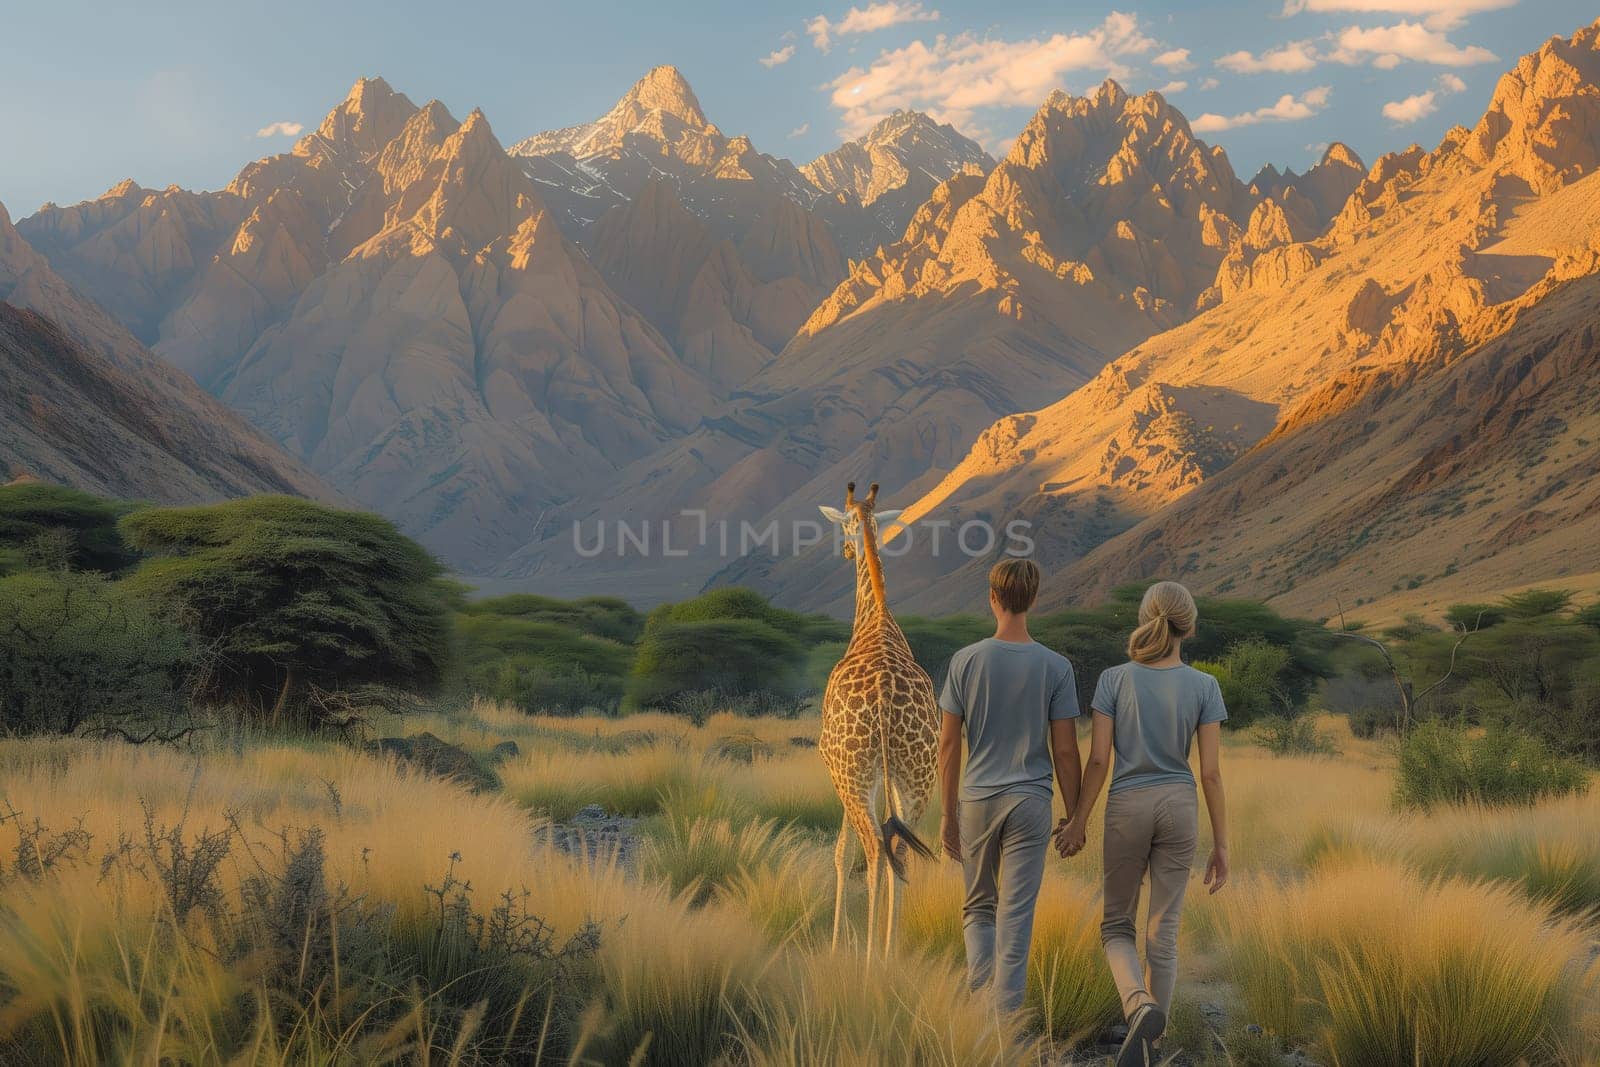 Couple strolling amidst giraffes and mountains in picturesque landscape by richwolf